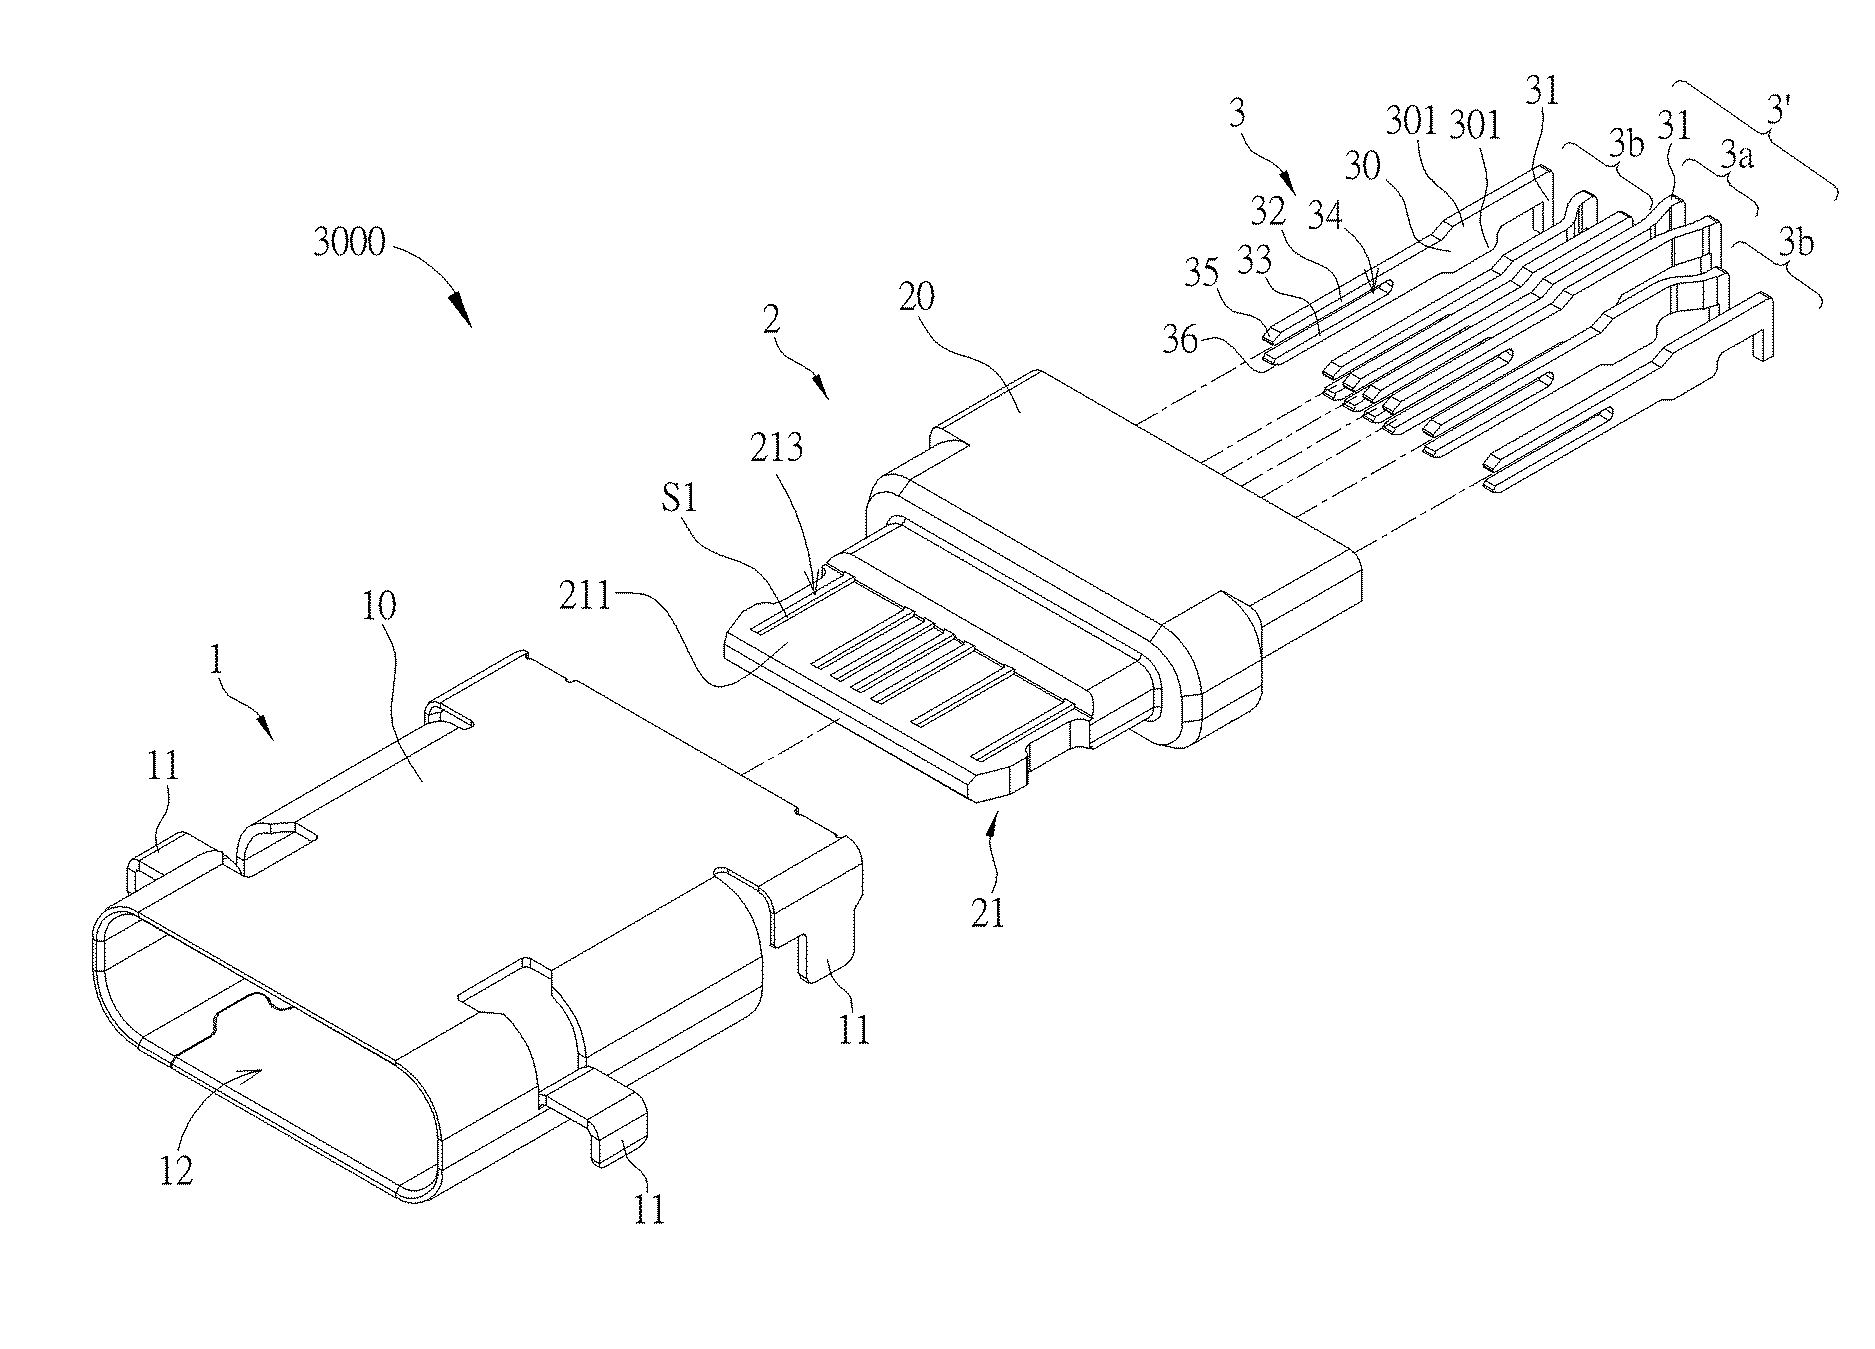 Port connector with capability of dual mating orientation